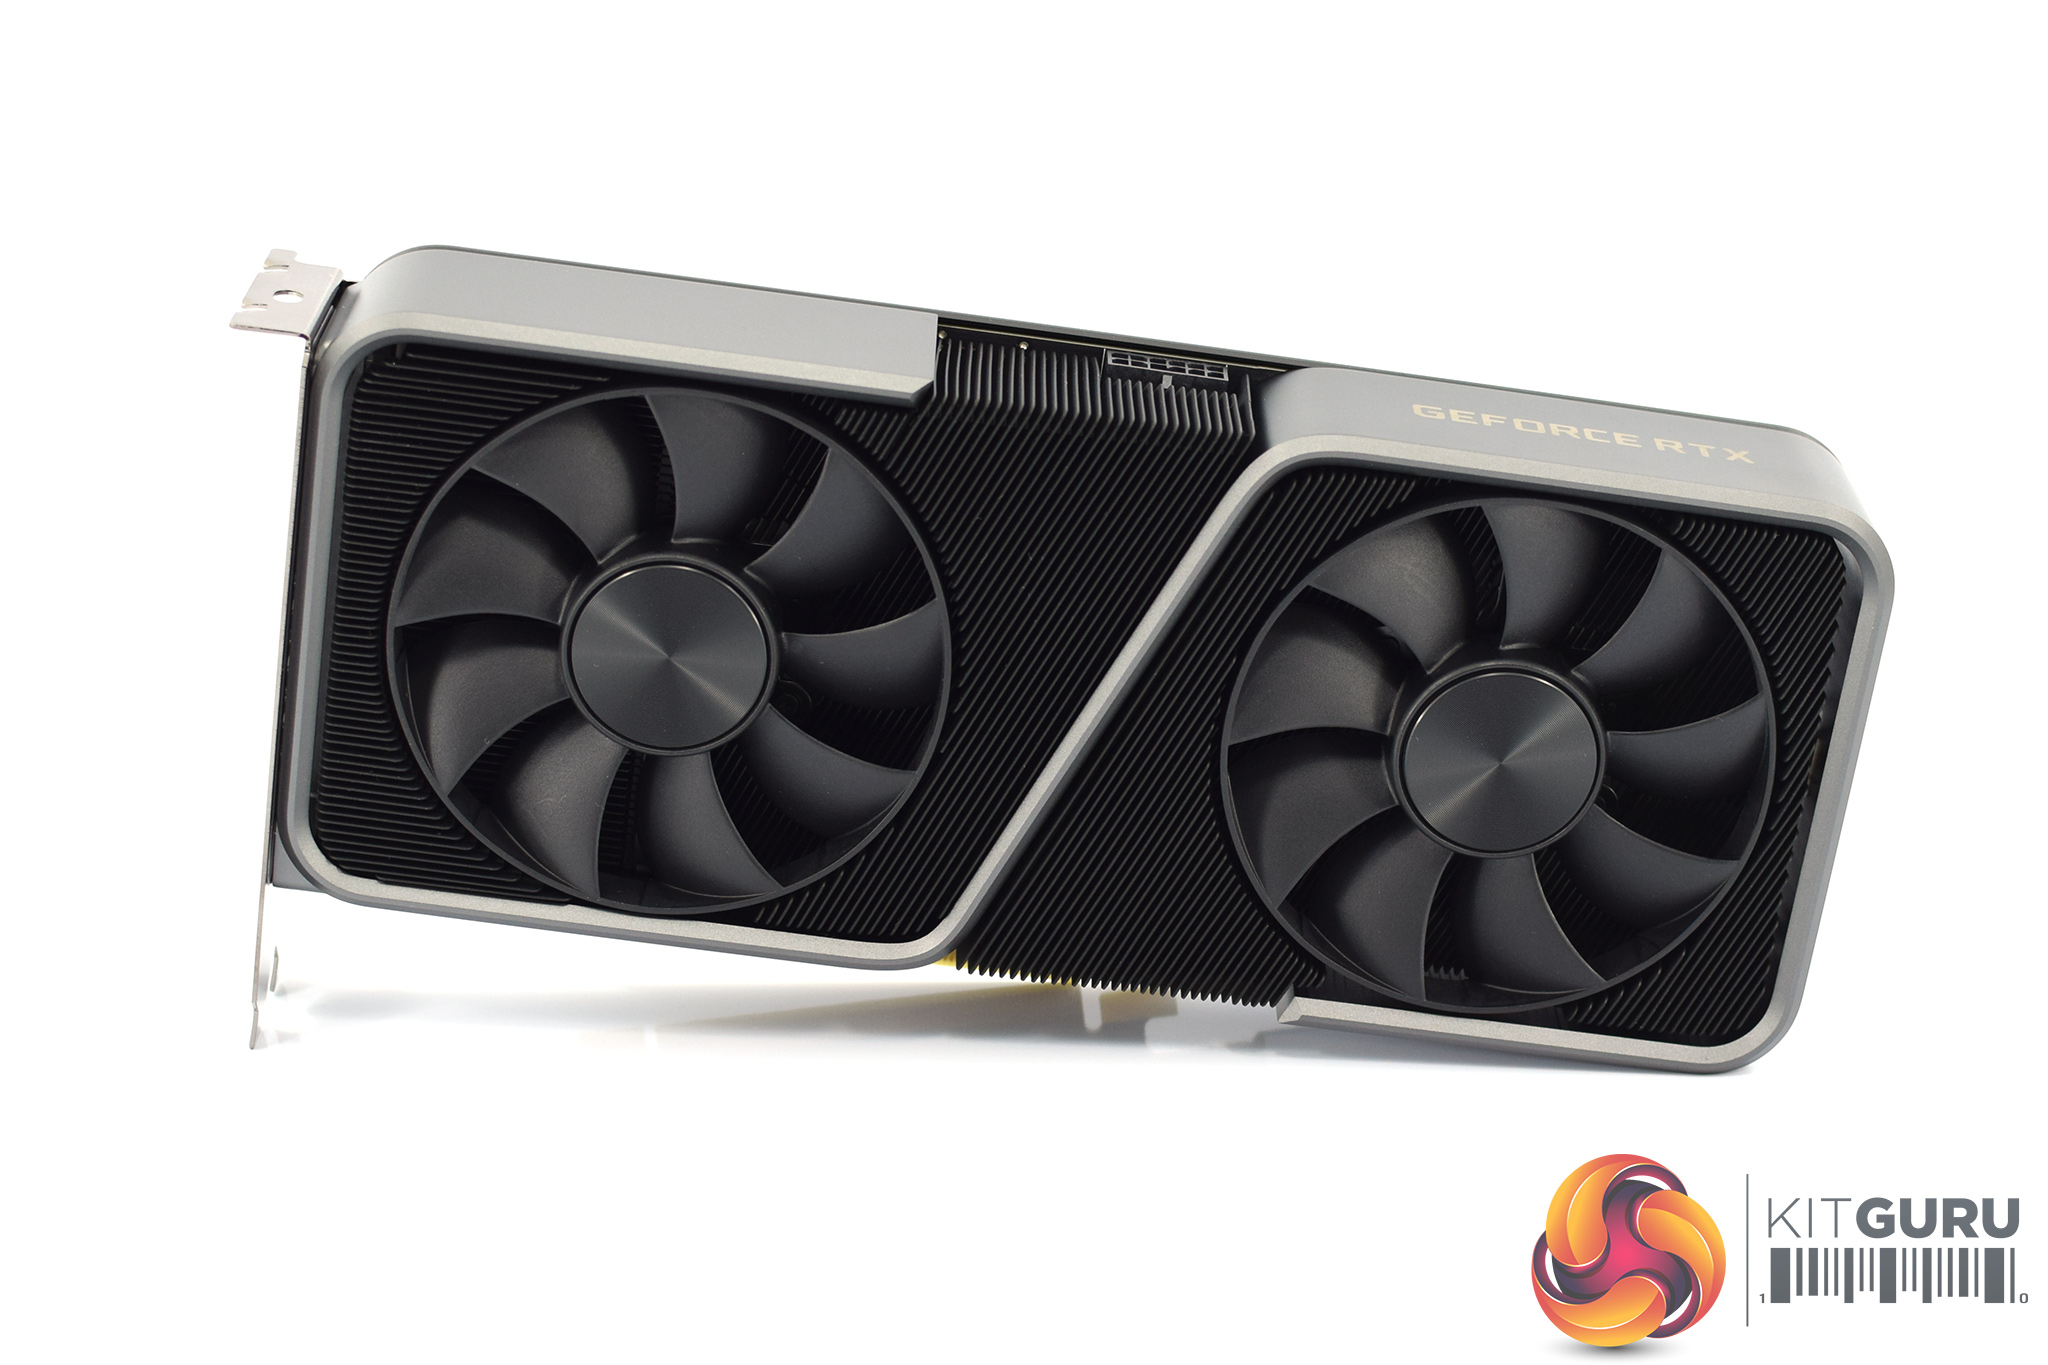 3070 founders edition. RTX 3070 ti founders Edition. NVIDIA RTX 3070 founders Edition. RTX 3070 founders Editions подсветка. GEFORCE GTX 3070 ti founders Edition.